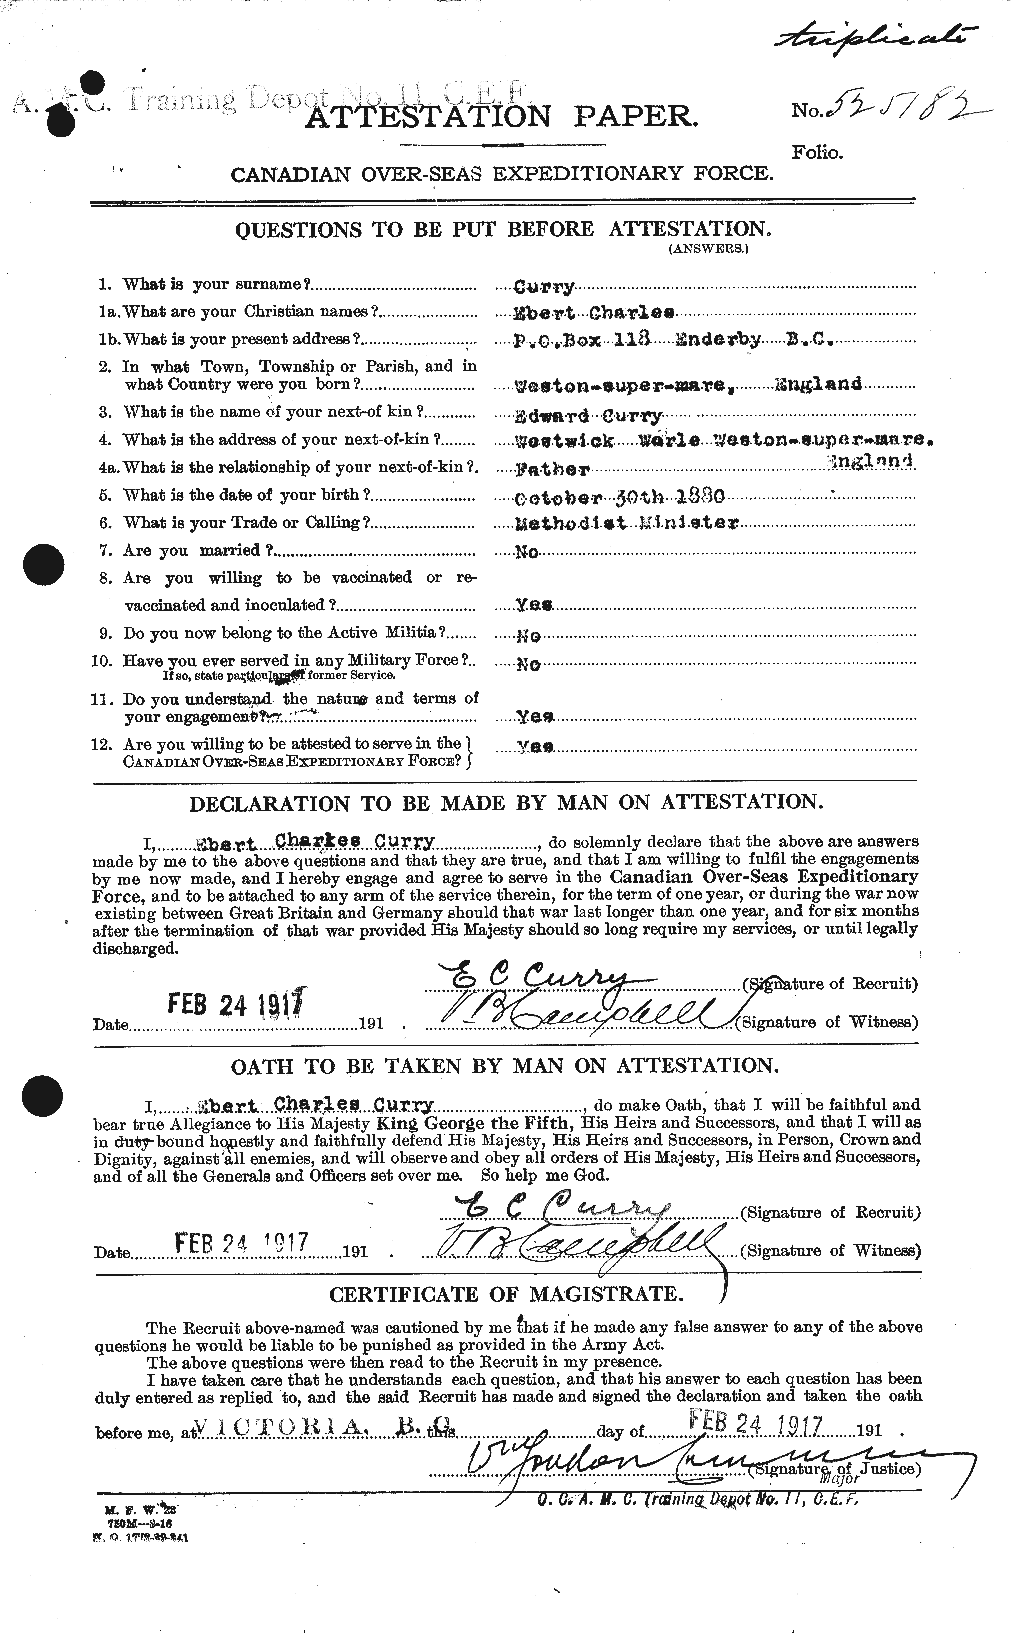 Personnel Records of the First World War - CEF 071203a